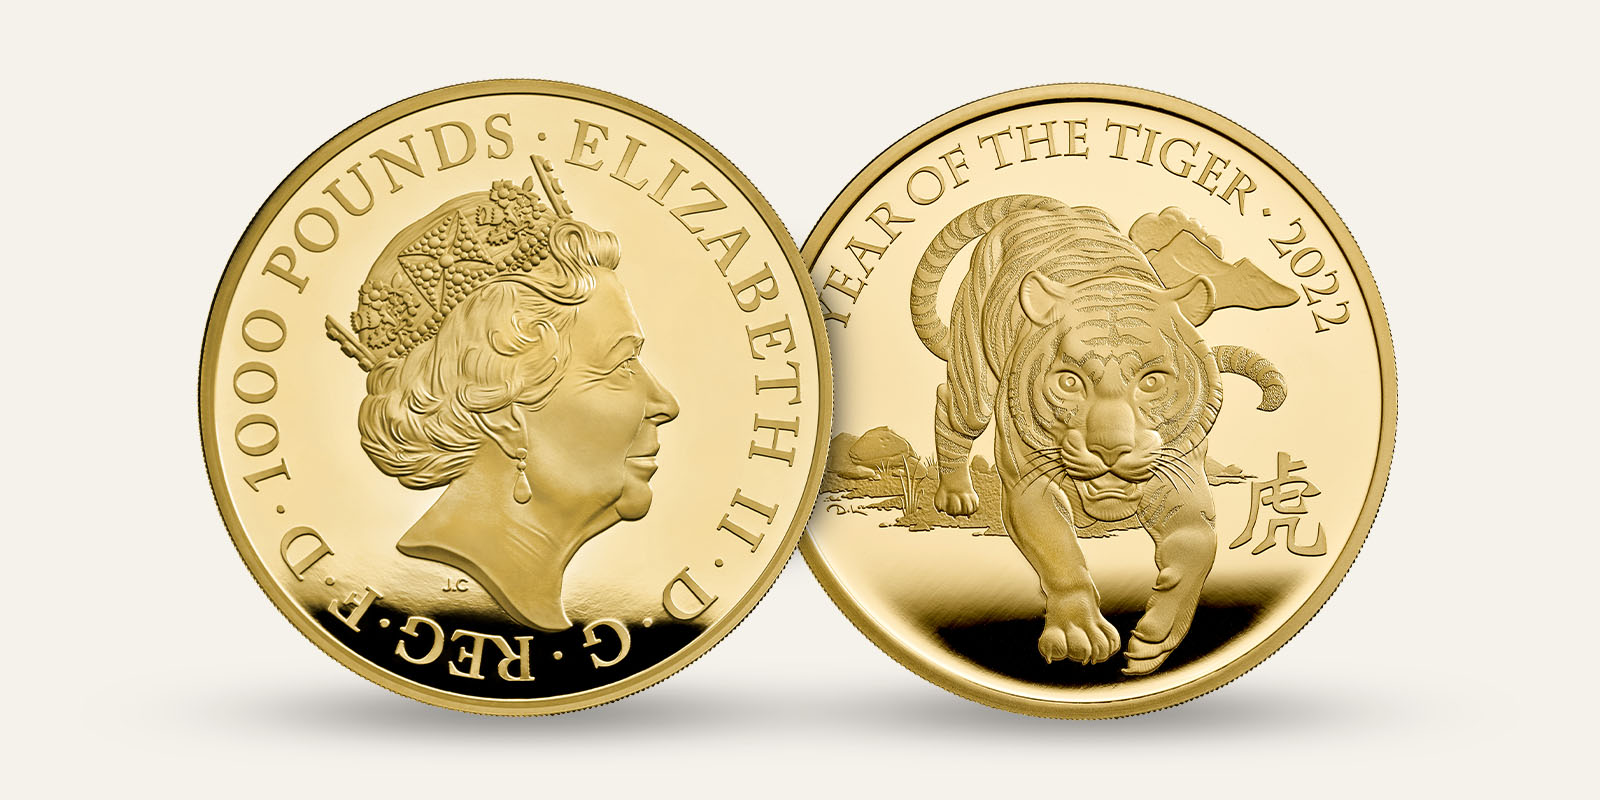 6-Lunar Year of the Tiger 2022 United Kingdom Gold Proof Kilo Coin_.jpg